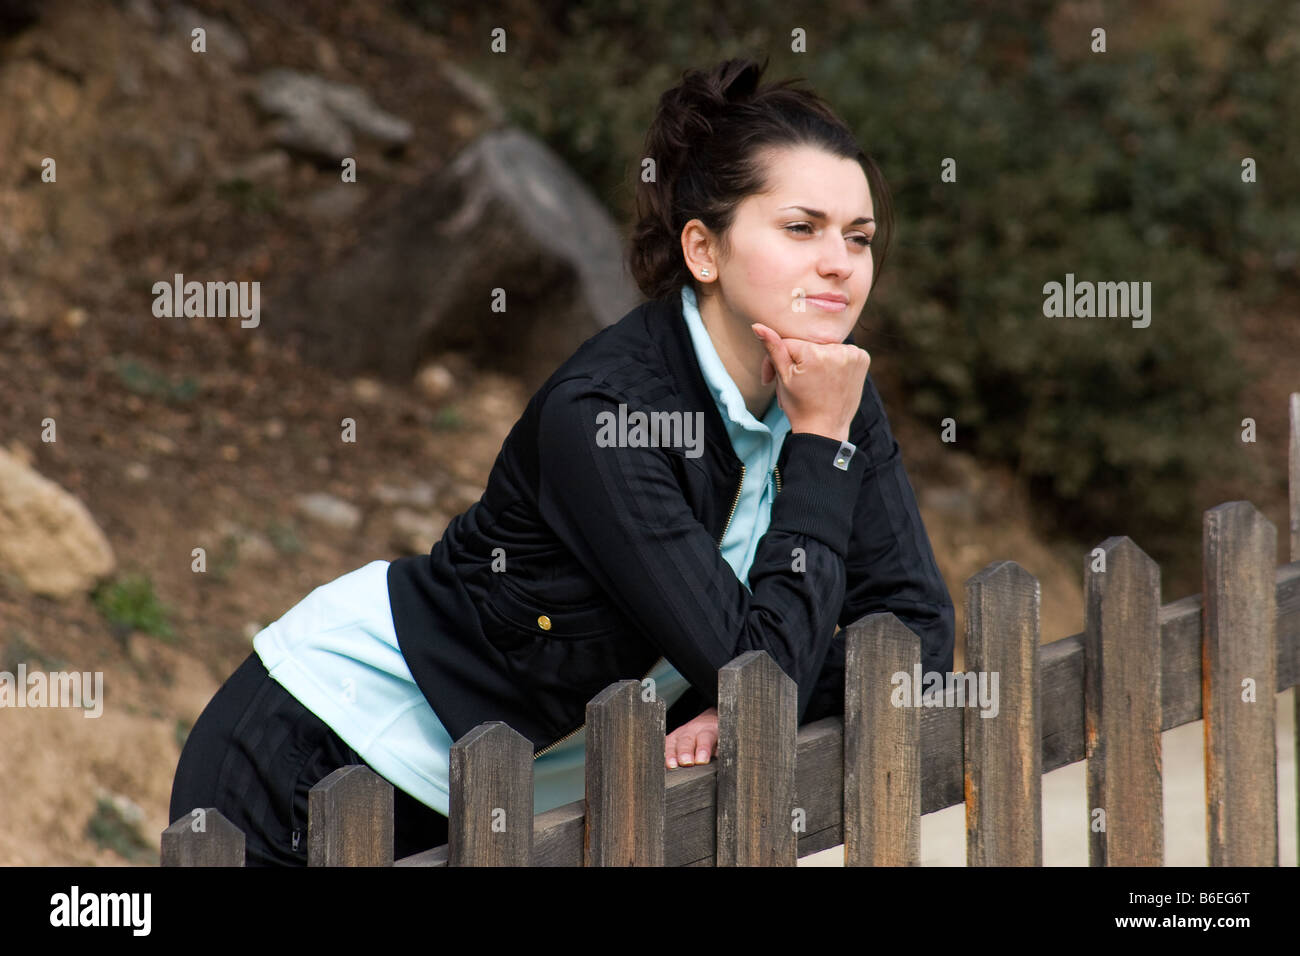 portrait sad looking young woman standing by fence Stock Photo